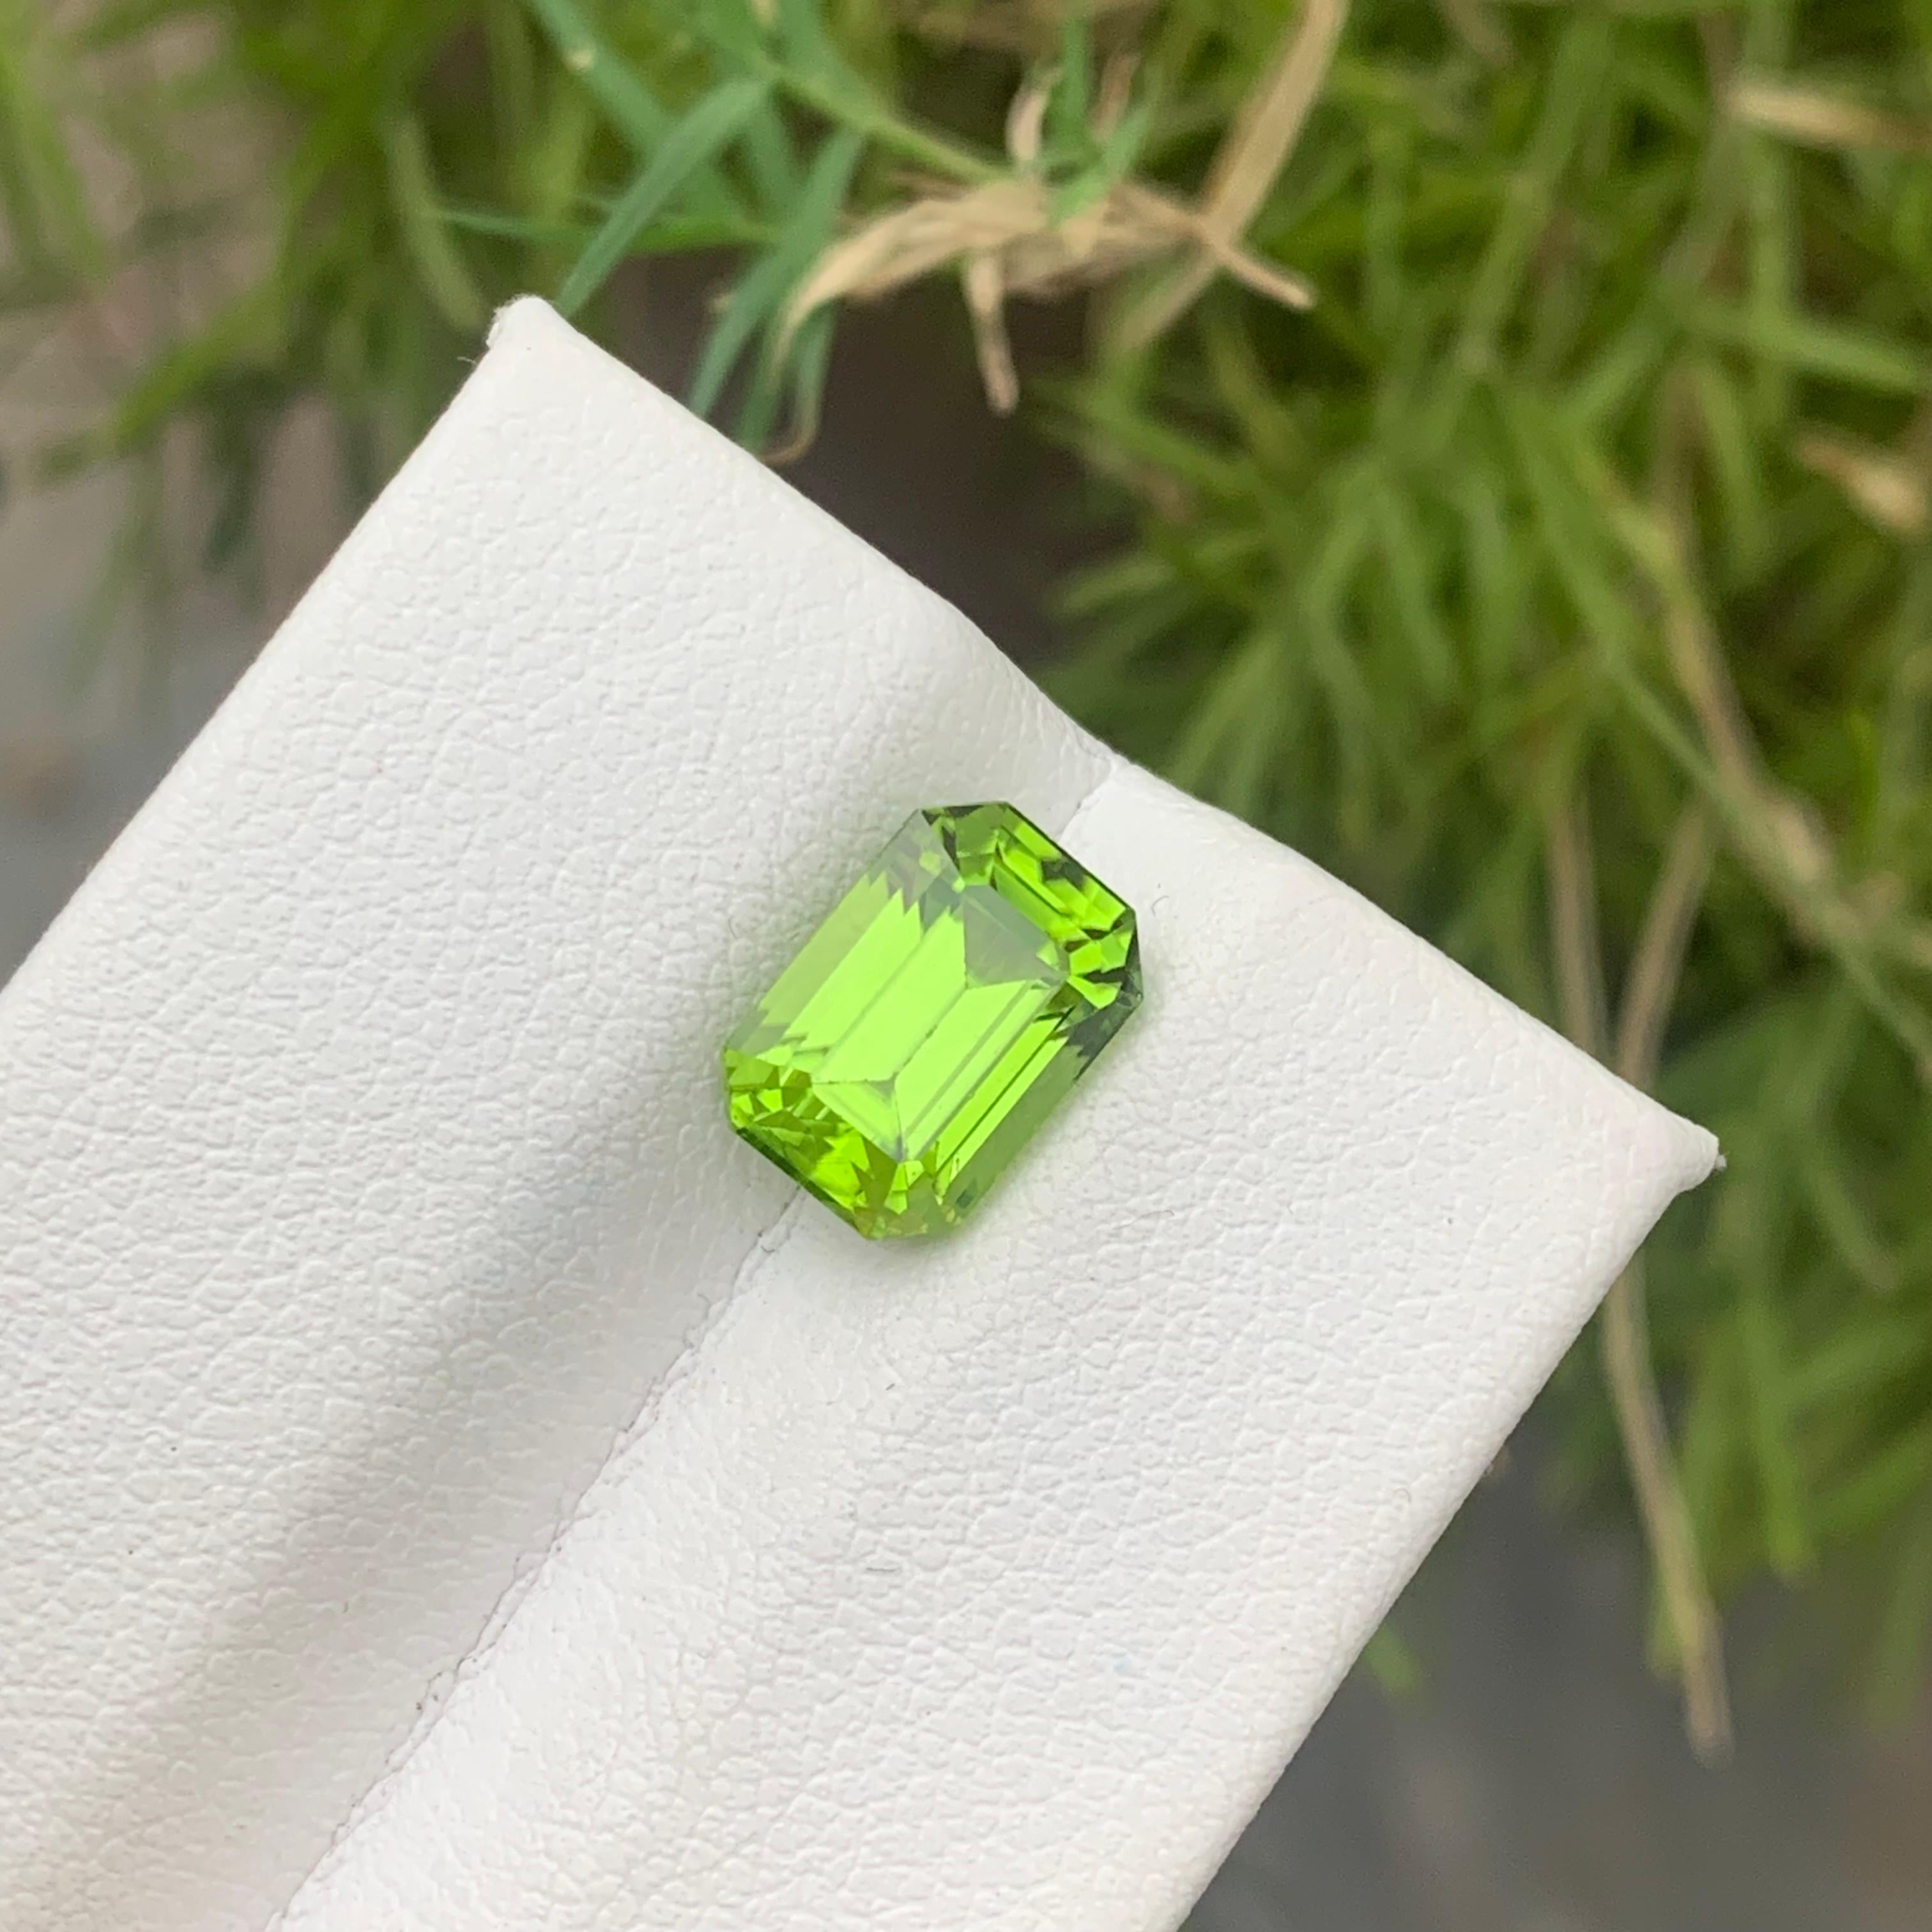 Gorgeous 3.35 Carat Natural Loose Green Peridot Gemstone from Pakistani Mine For Sale 4